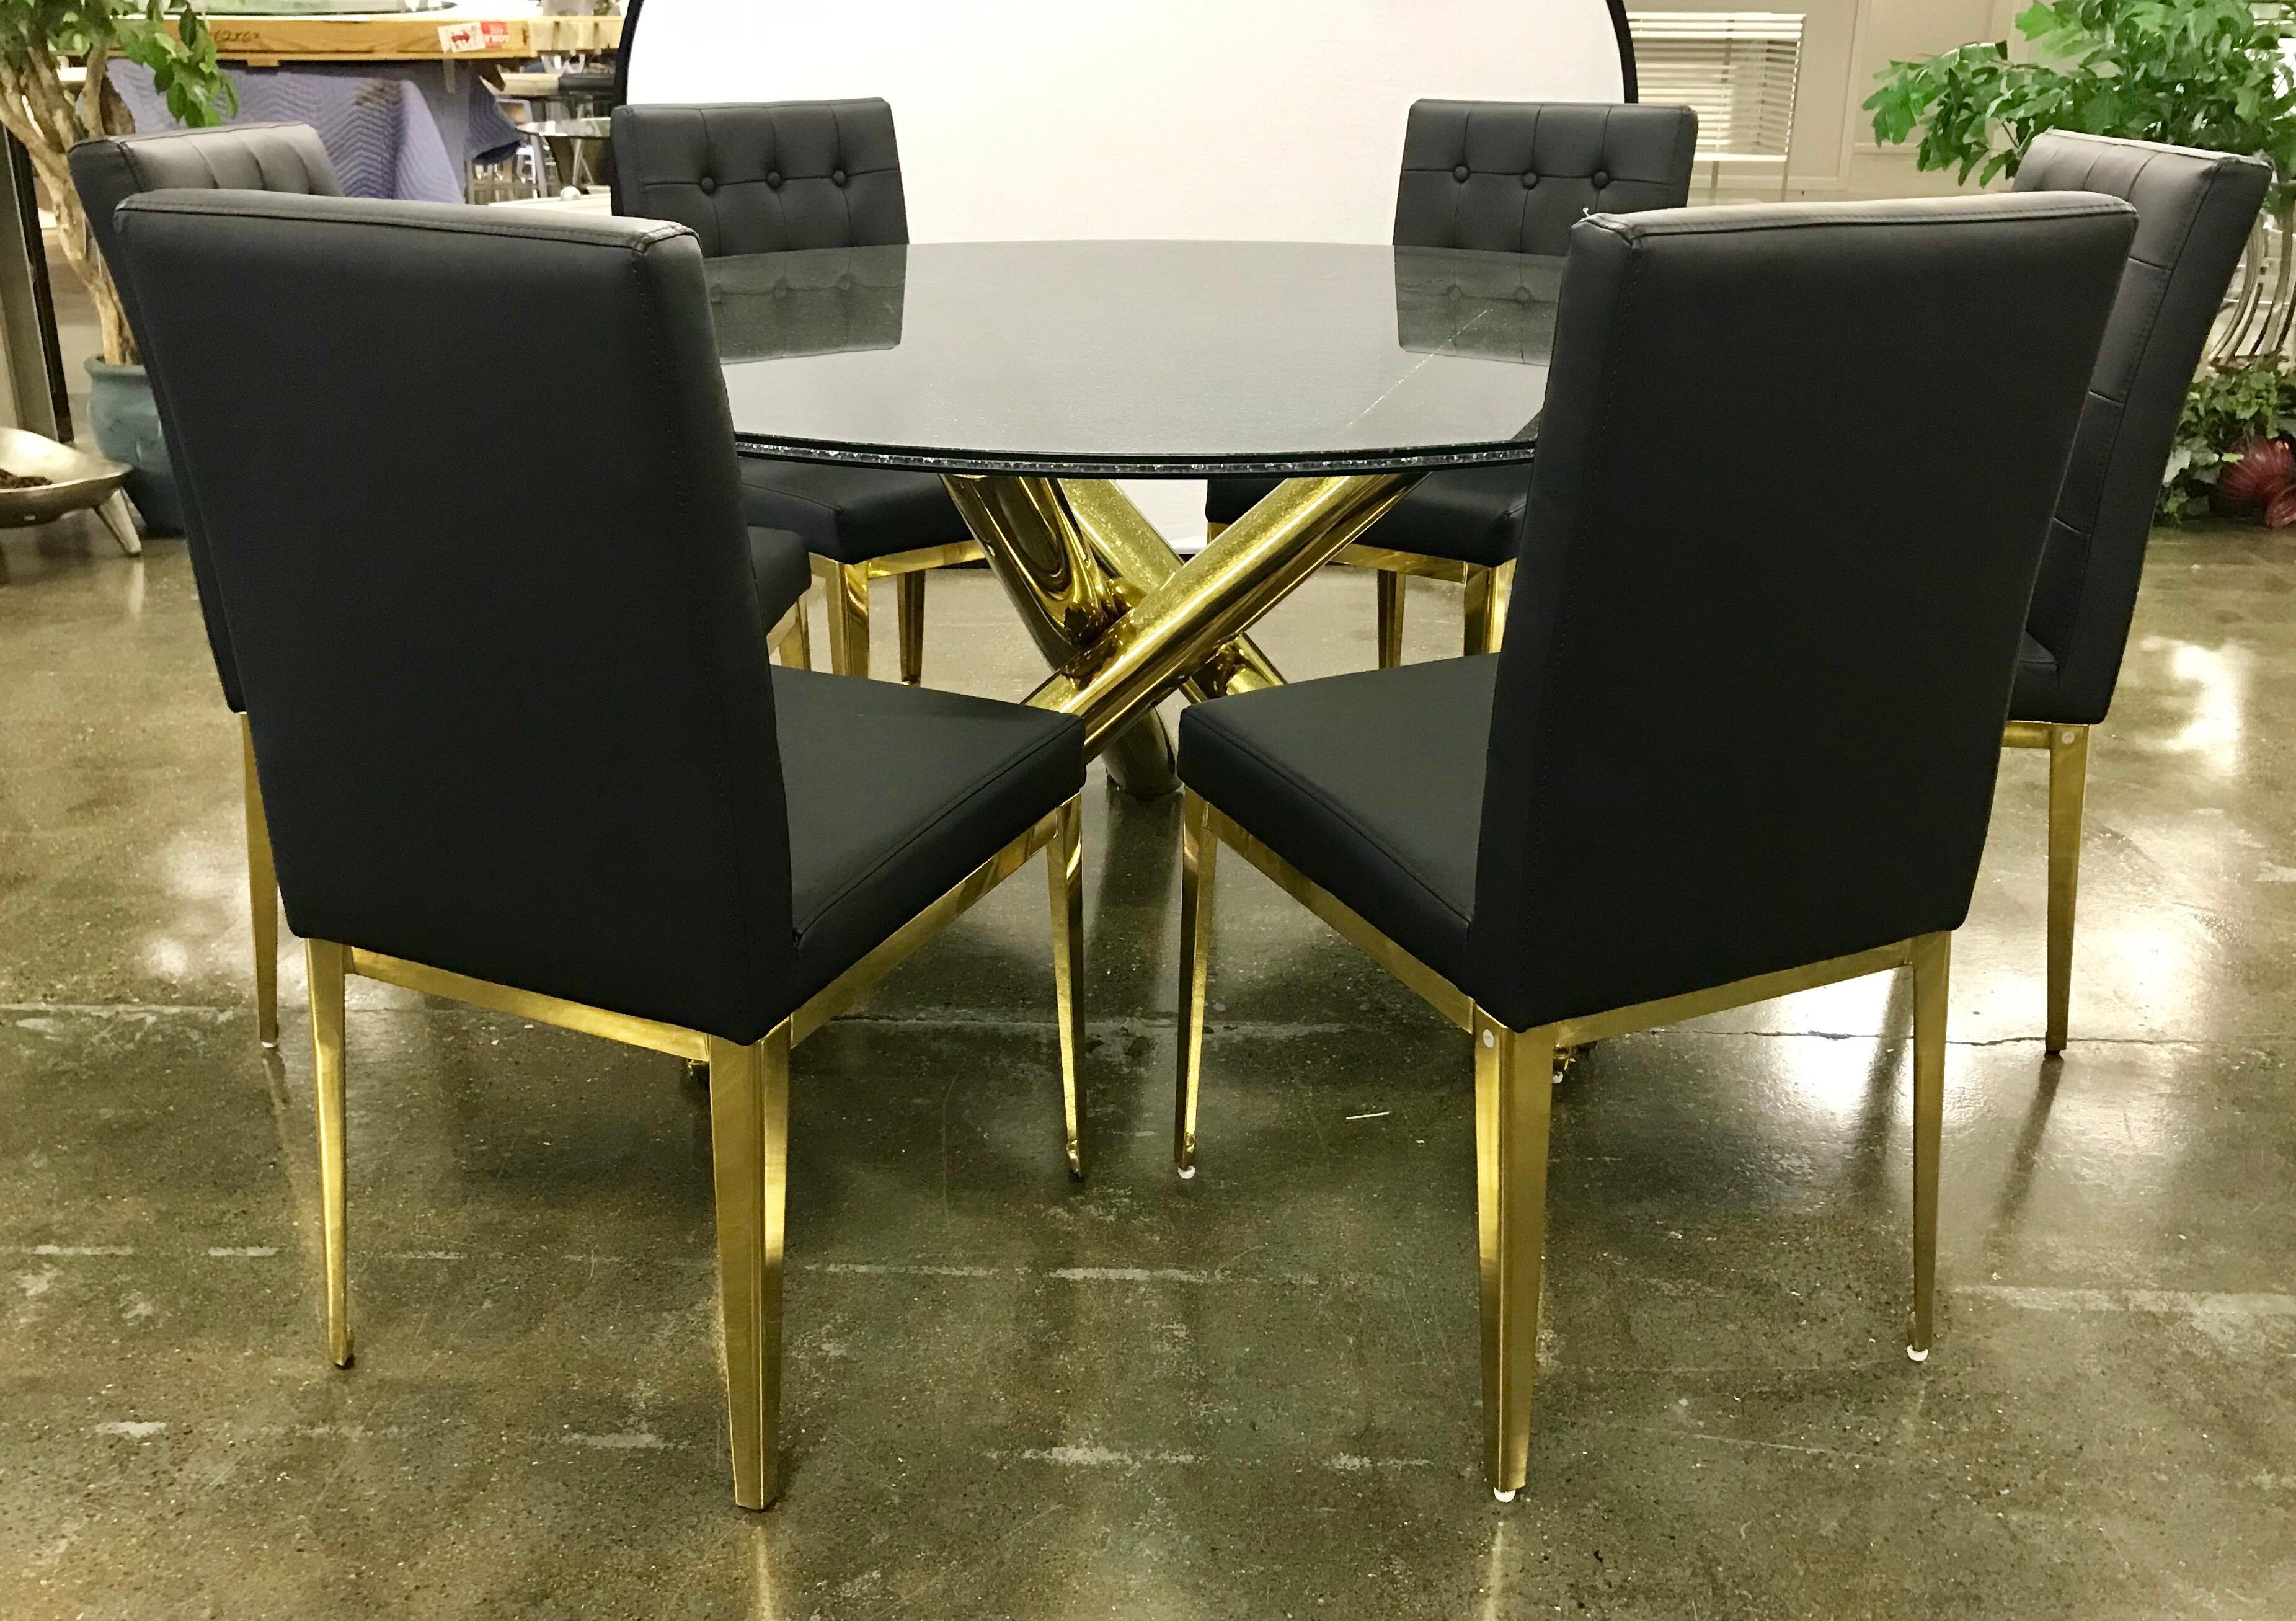 Stunning round crackled glass top table on a brass sculptural base with six matching black leather
chairs with brass legs. Chairs have button tufting on the back. The set is in excellent condition and looks new. The glass top has the crackling